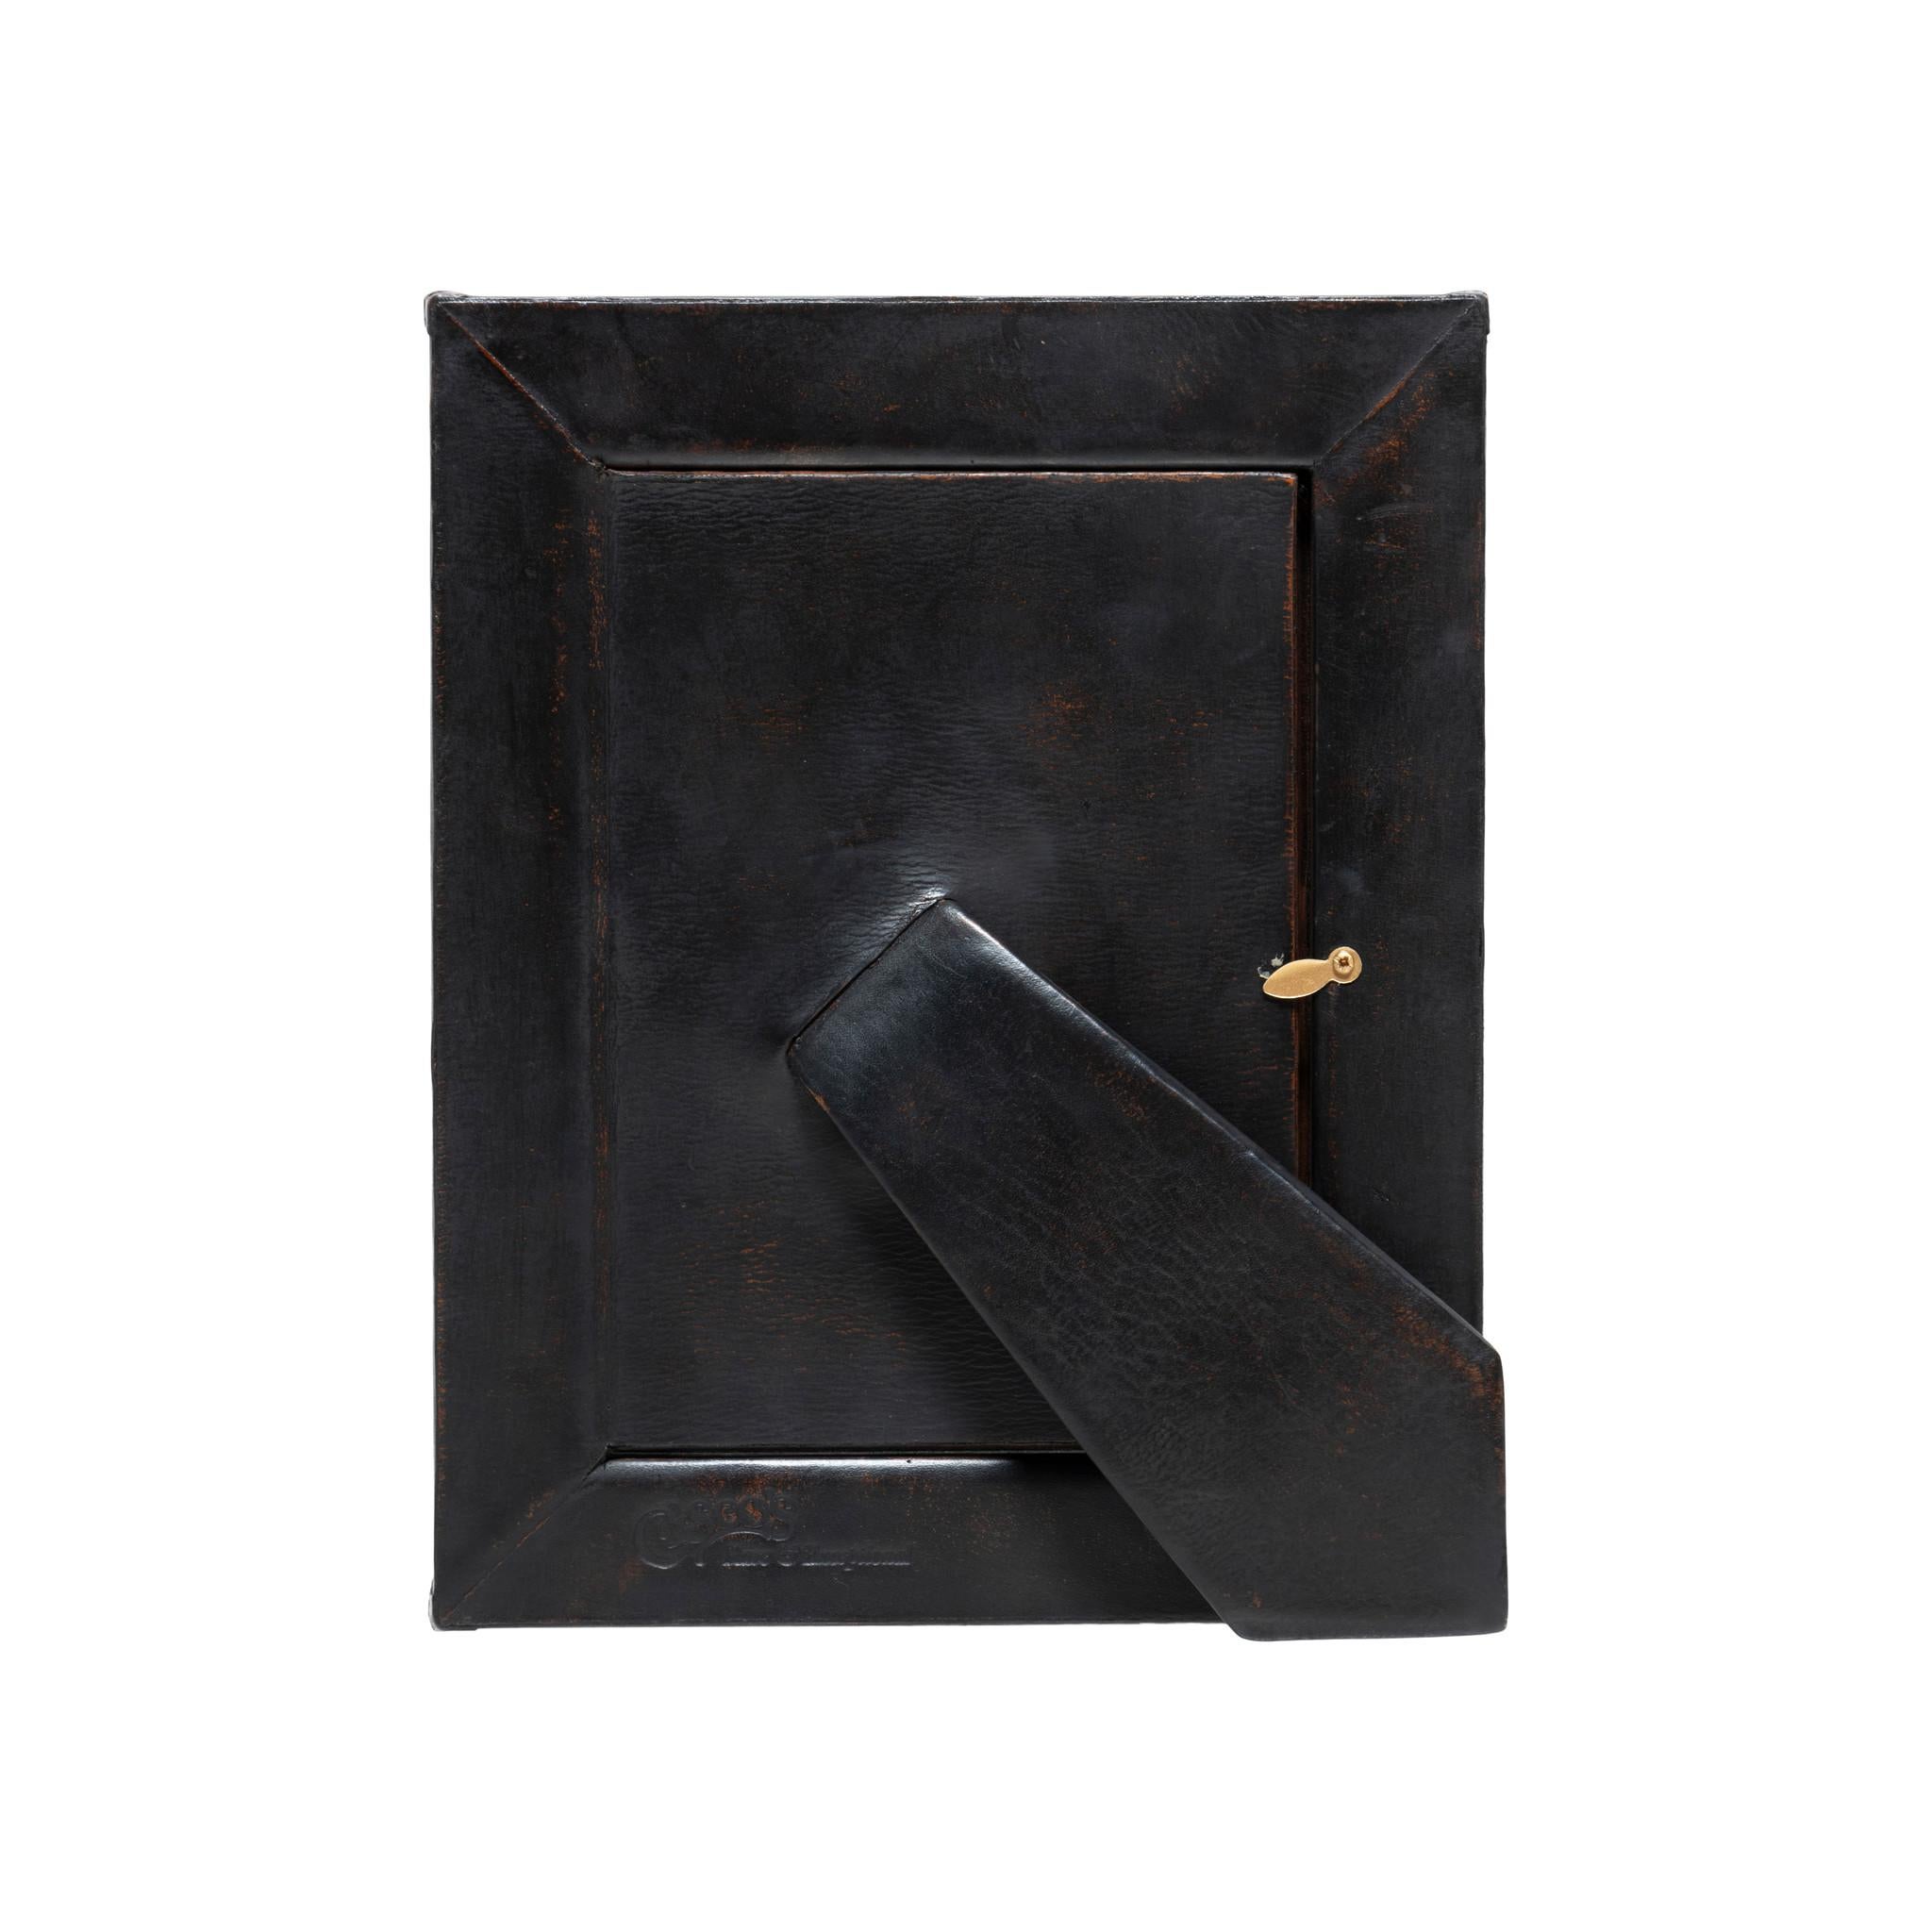 Contemporary 8x10 Medium Brown and Black Leather Tabletop Picture Frame - The Artisan For Sale